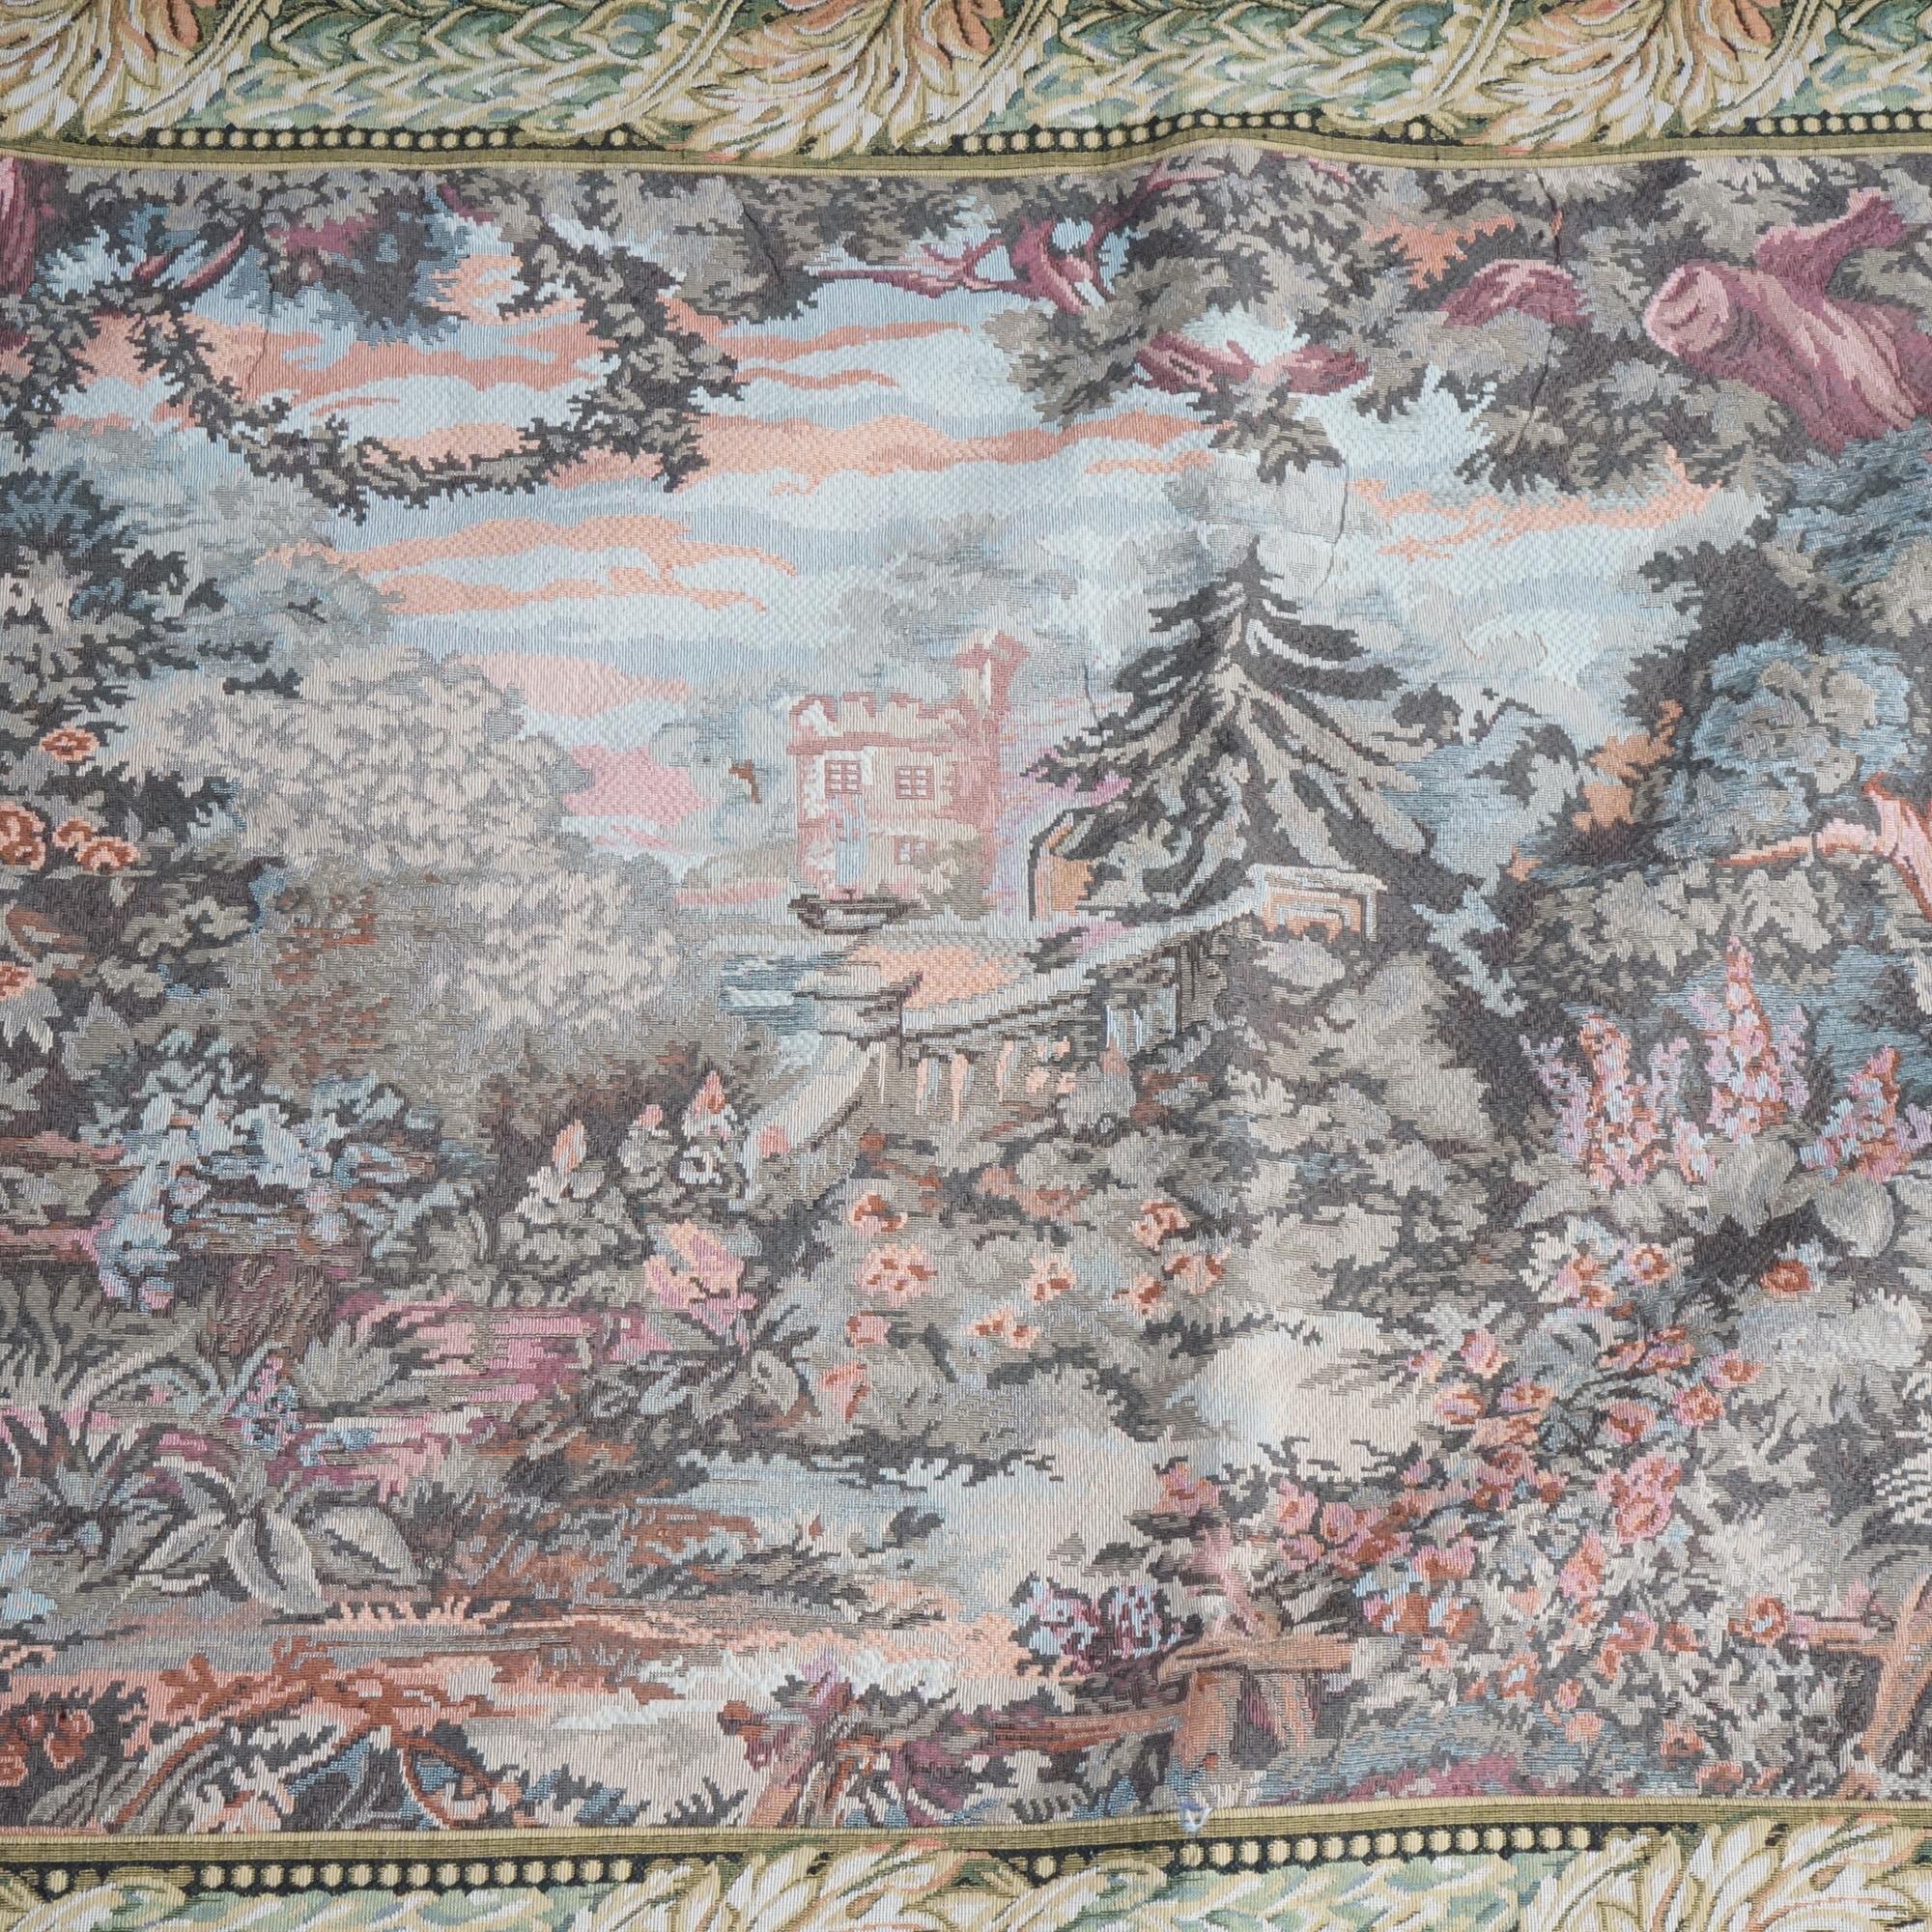 A Contemporary Greco-Roman Scenic landscape wall tapestry 20th century

Measures- 40.25''H x 81''W x .5''D.